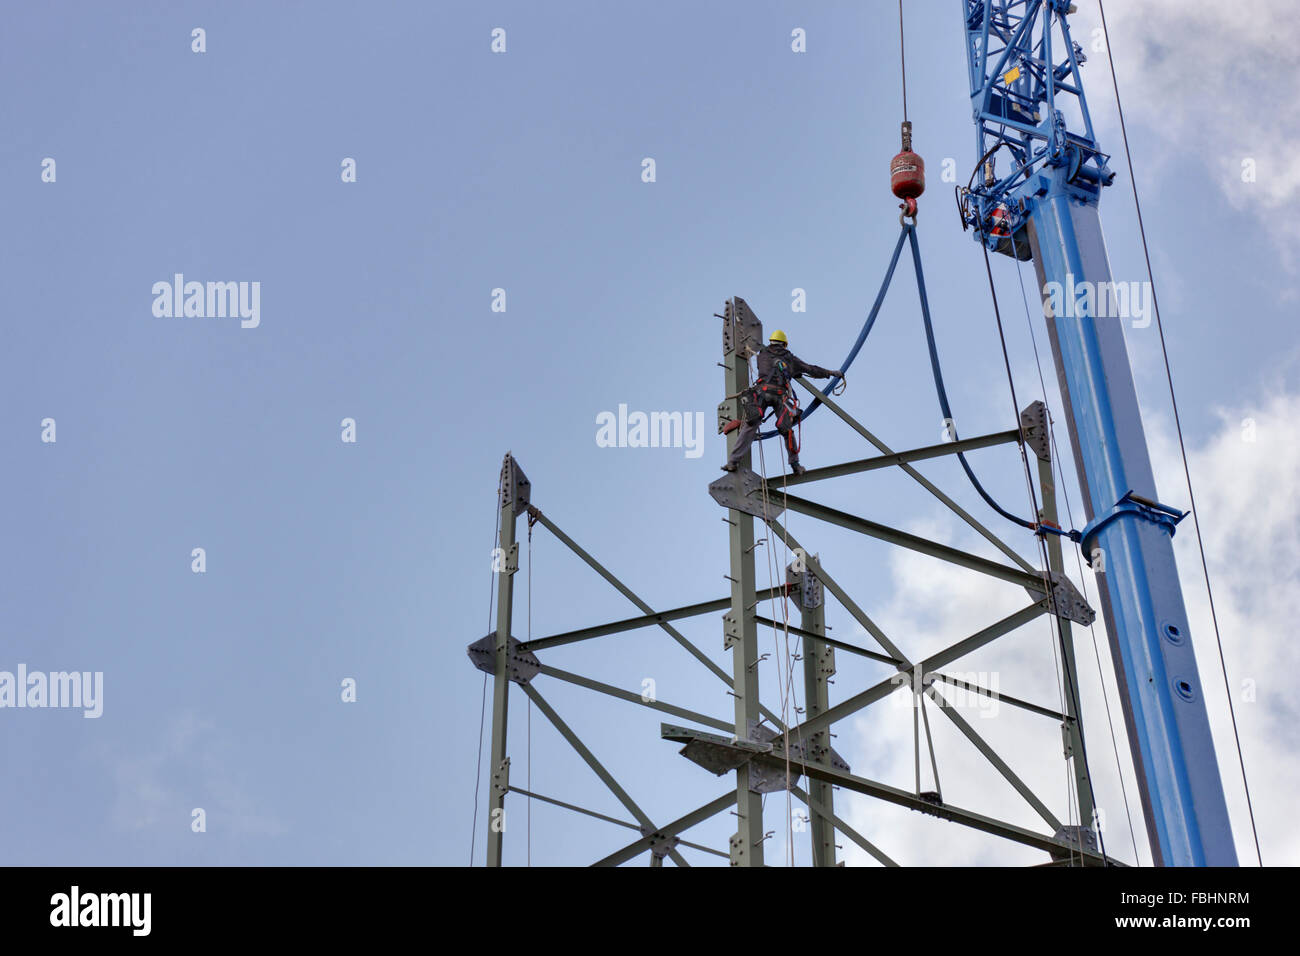 Assembling of the pylon, man workinging in the high-voltage power pylon, crane, Thuringian Forest Stock Photo